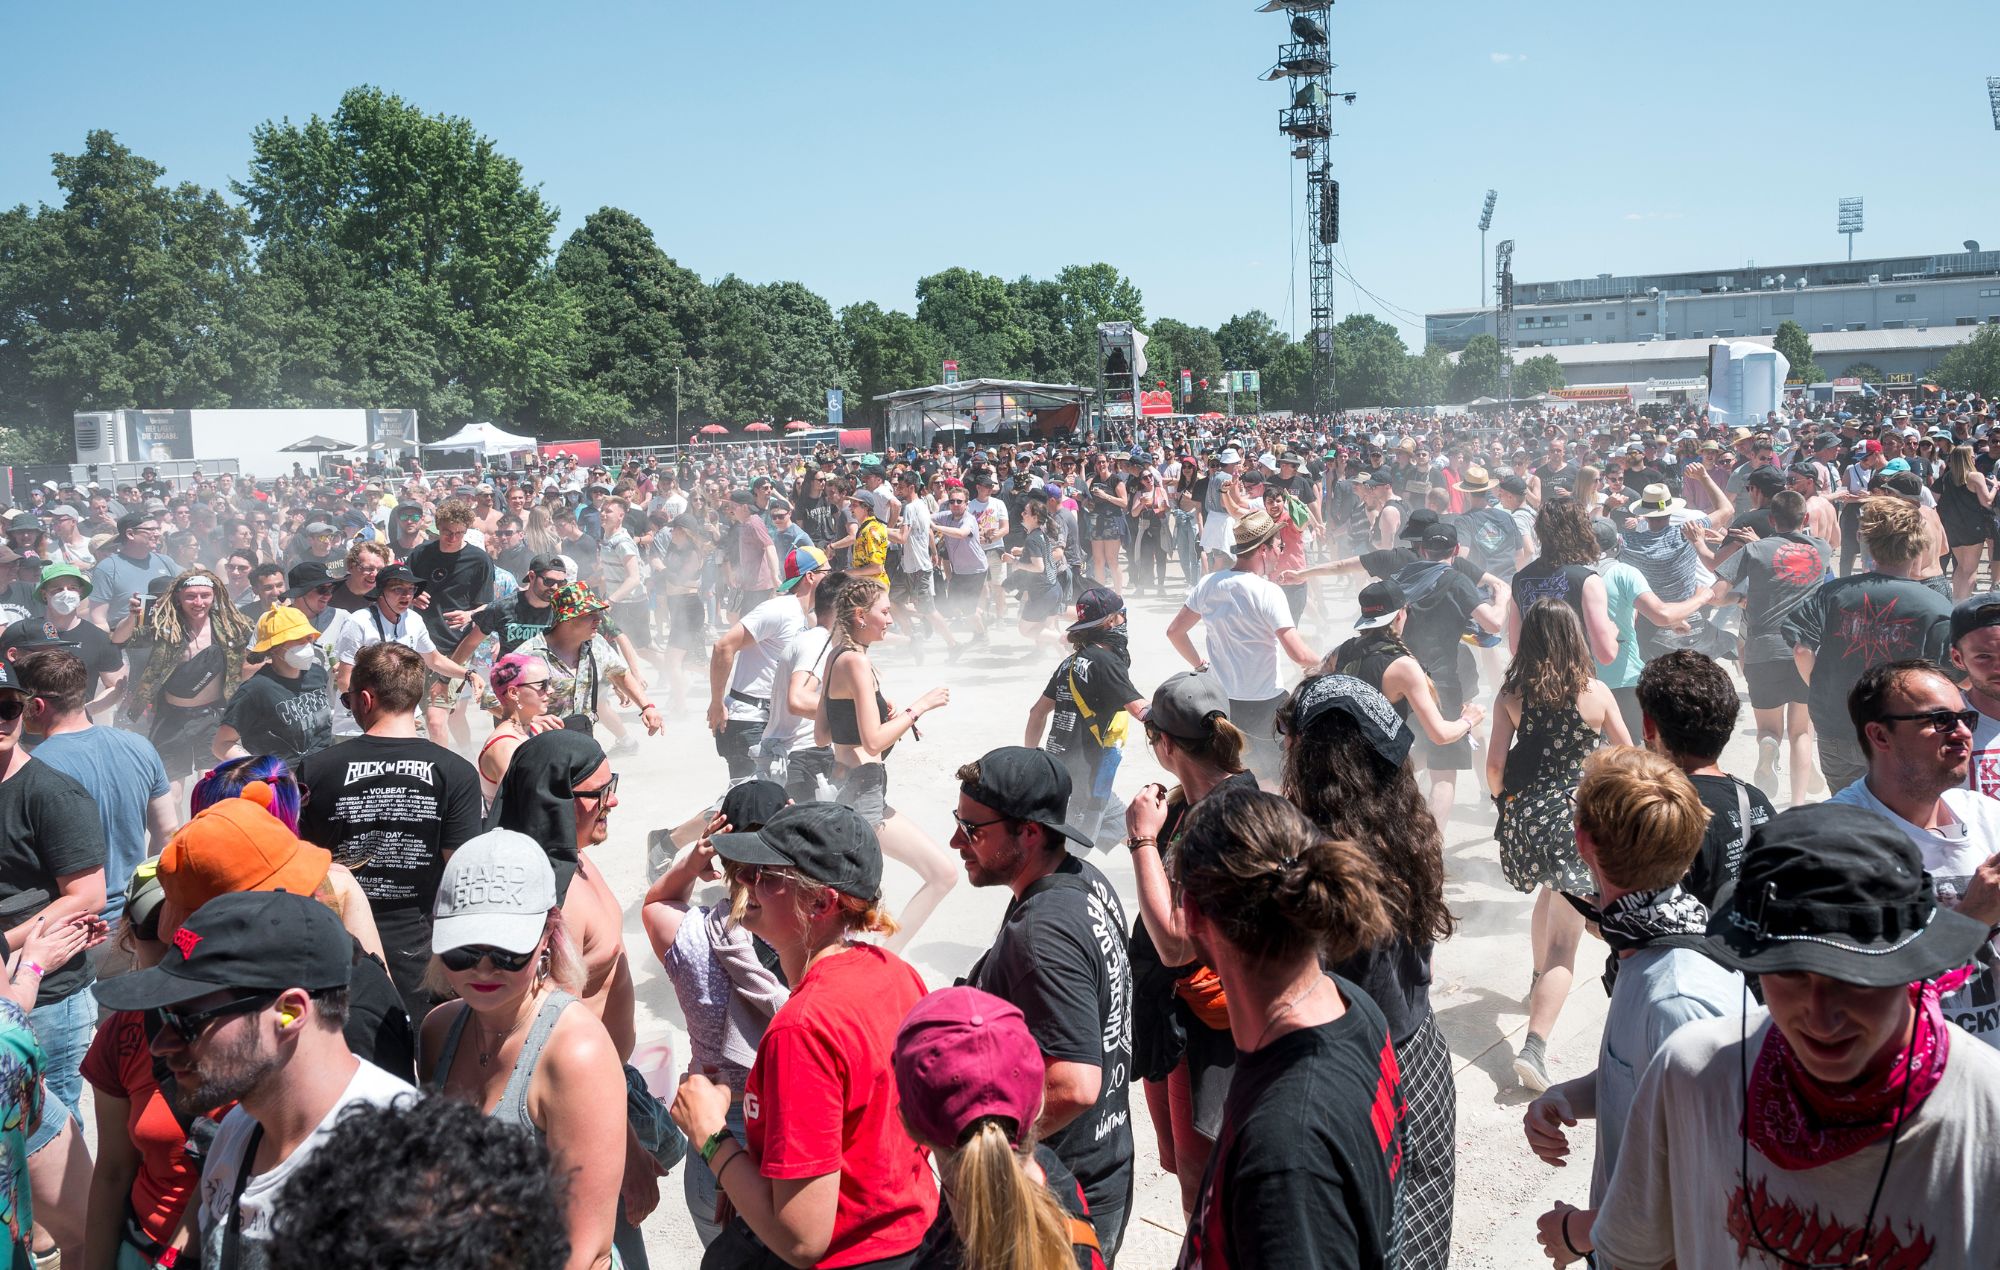 Huge rock festival announces designated moshing zone with “hardcore dancing styles not permitted”